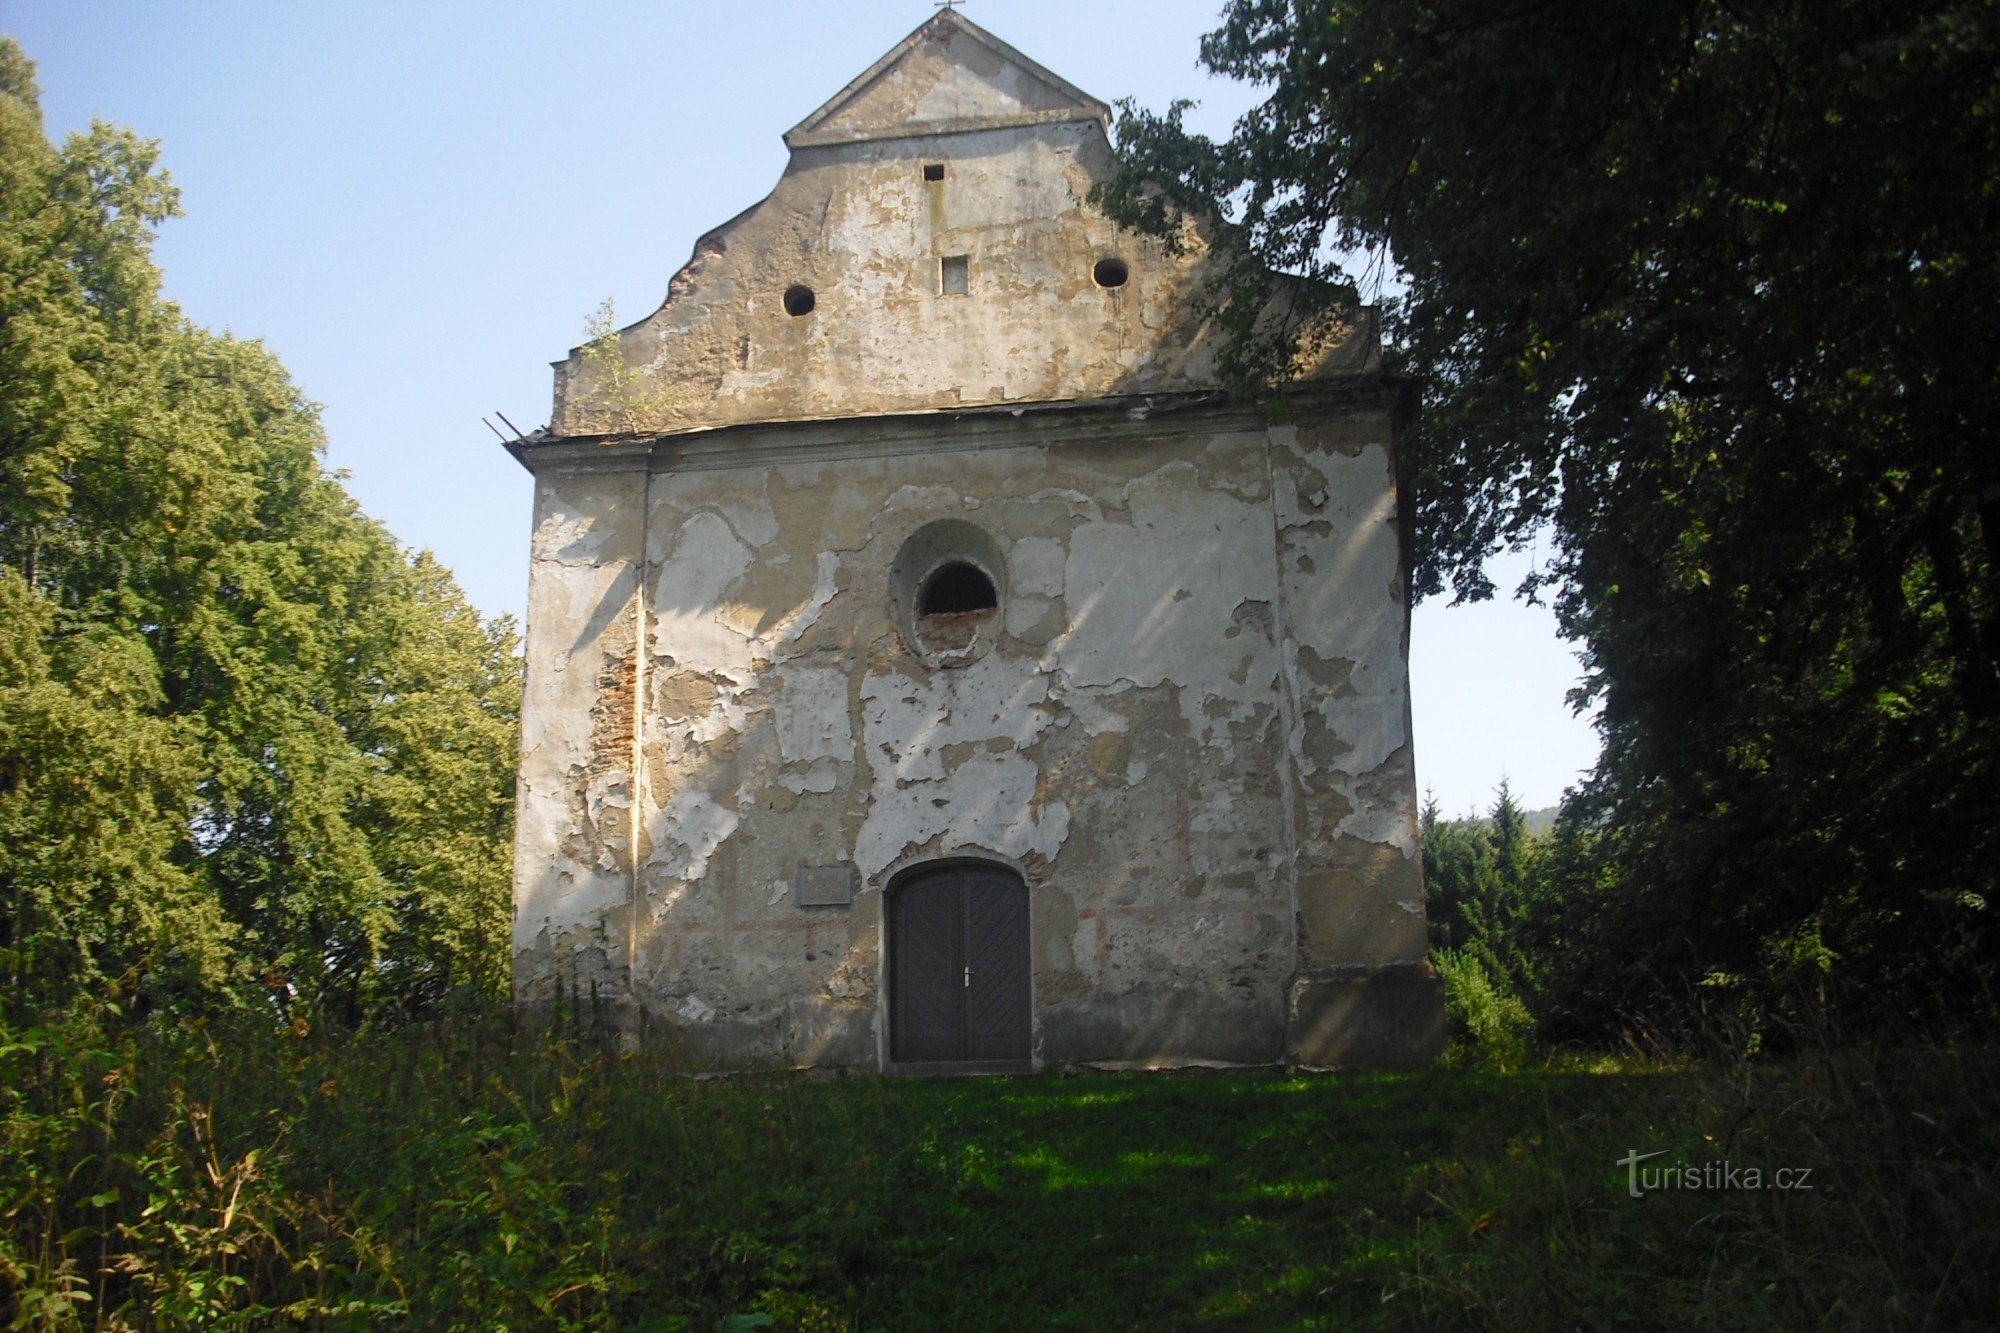 Chapel of St. Rochus, which we will meet on the way.